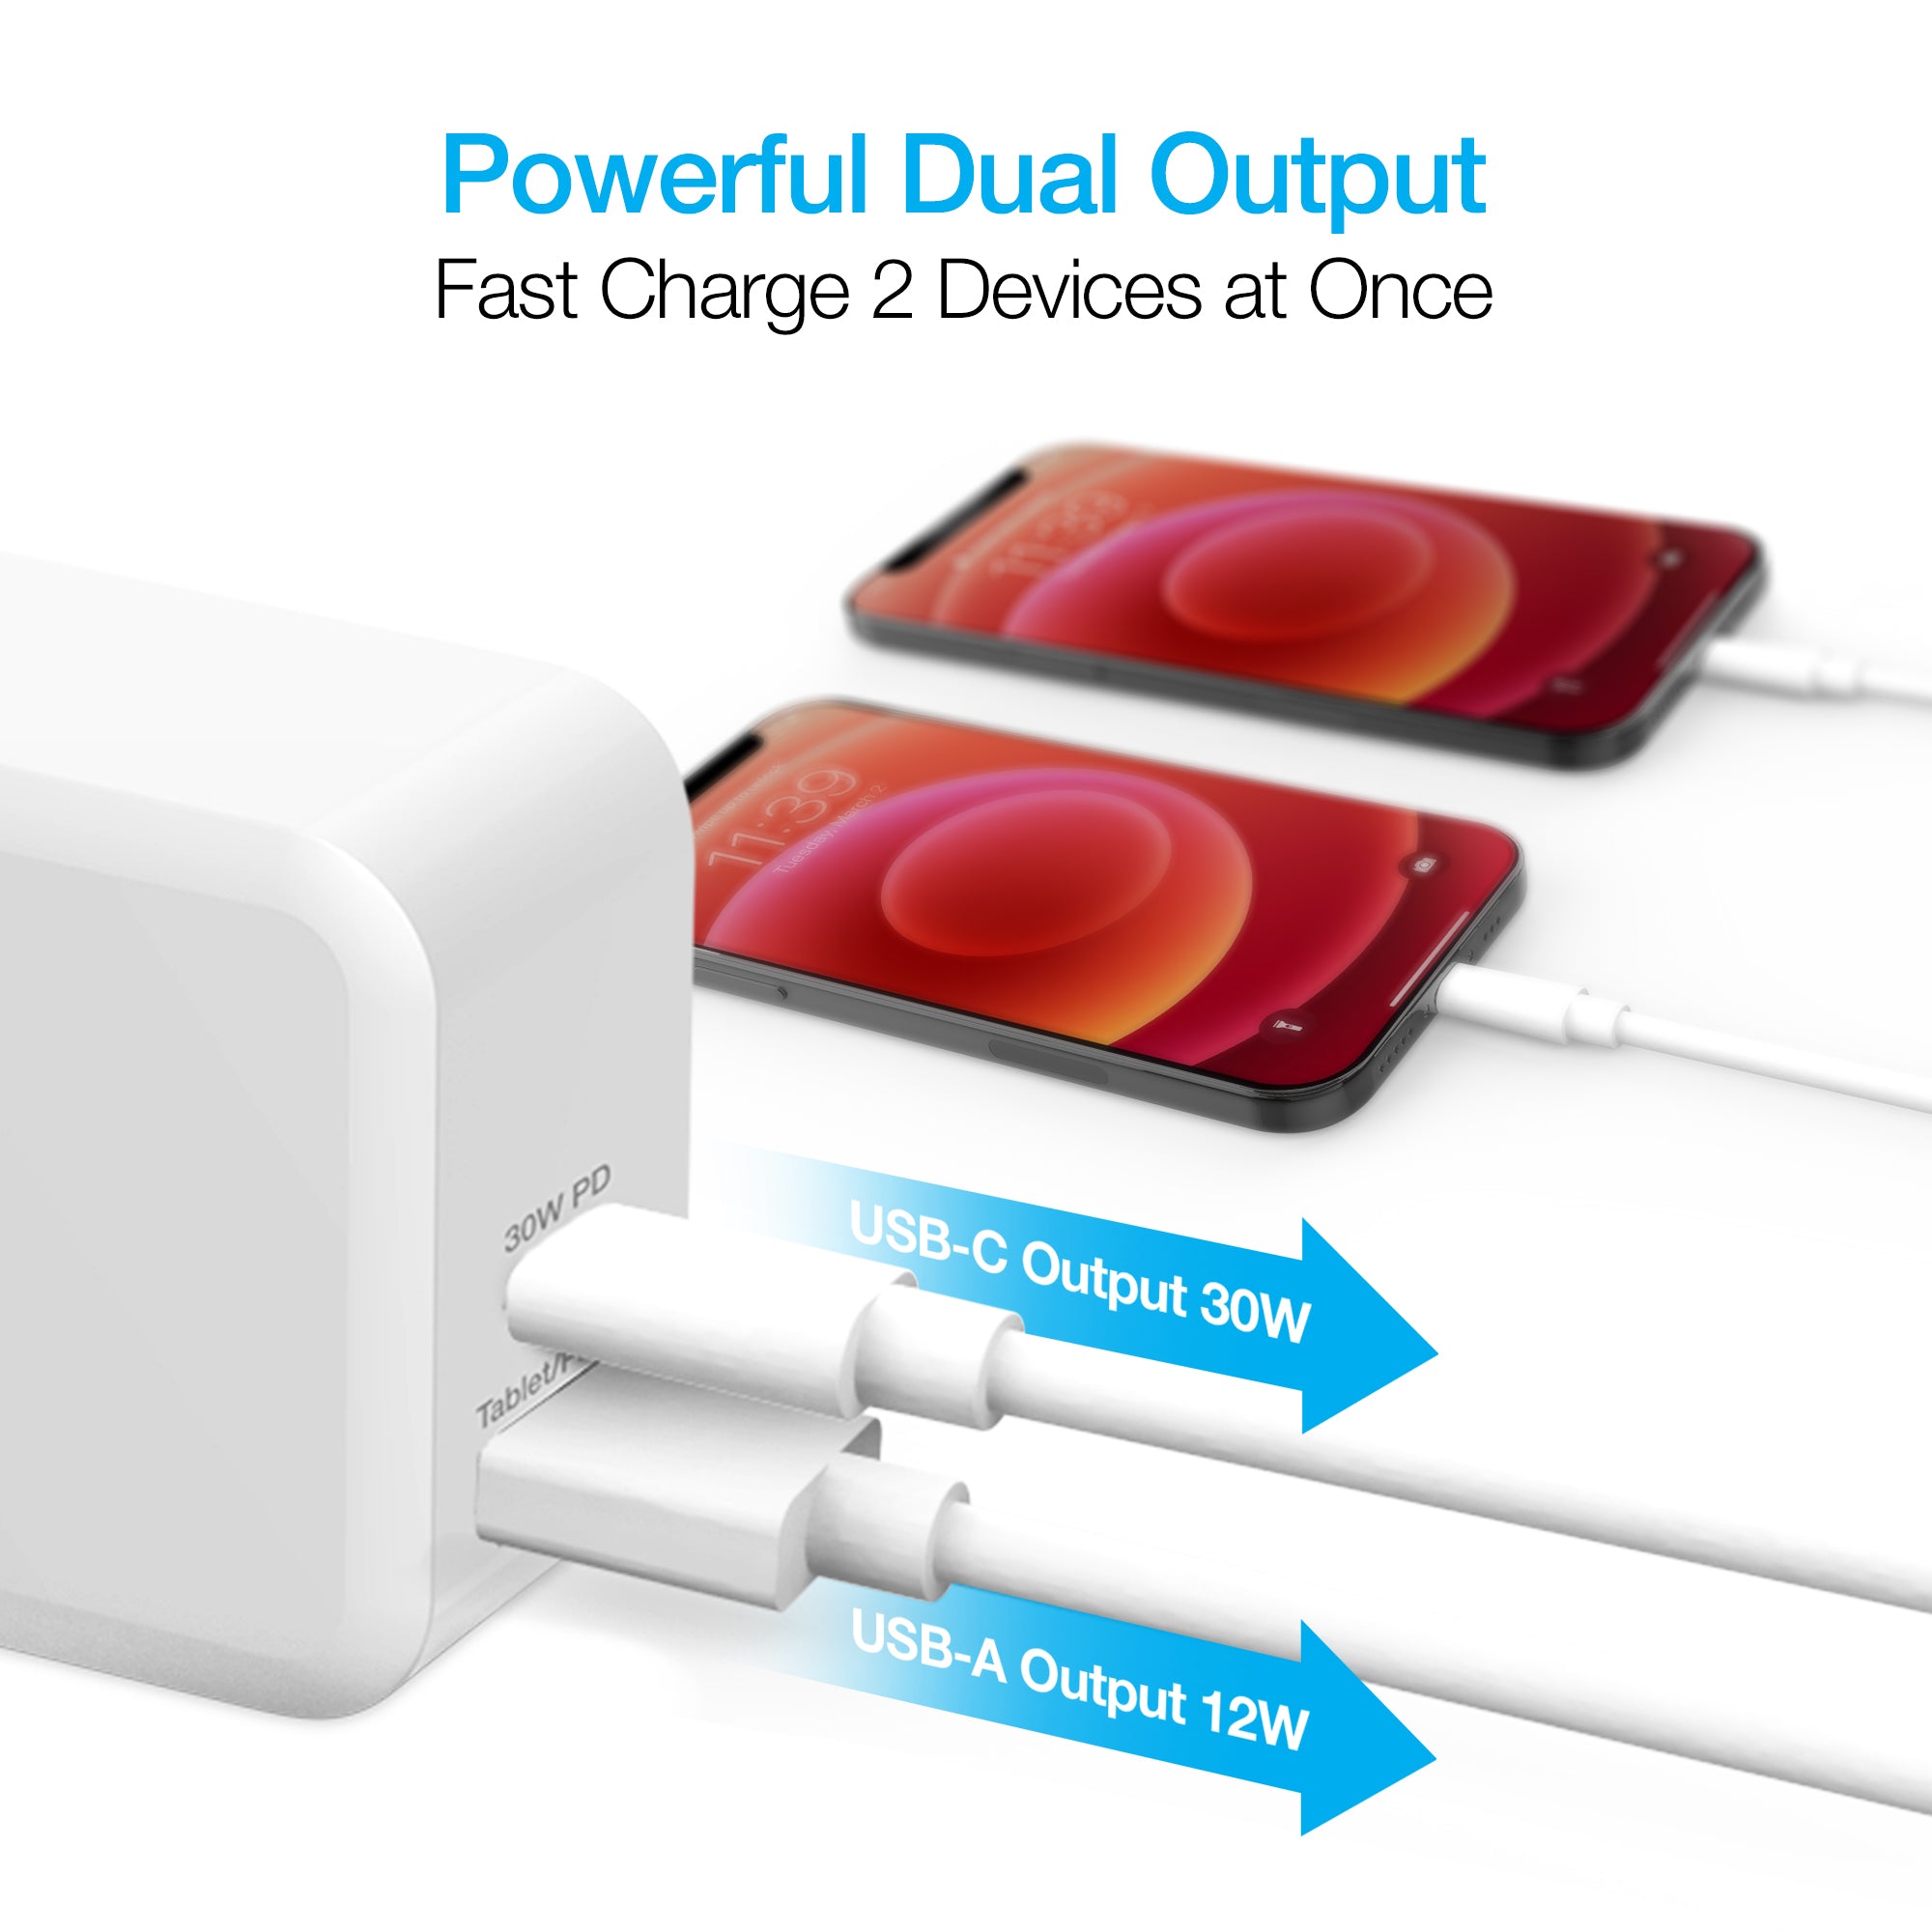 Cargador de red USB-C Power Delivery y USB-A Quick Charge 20W